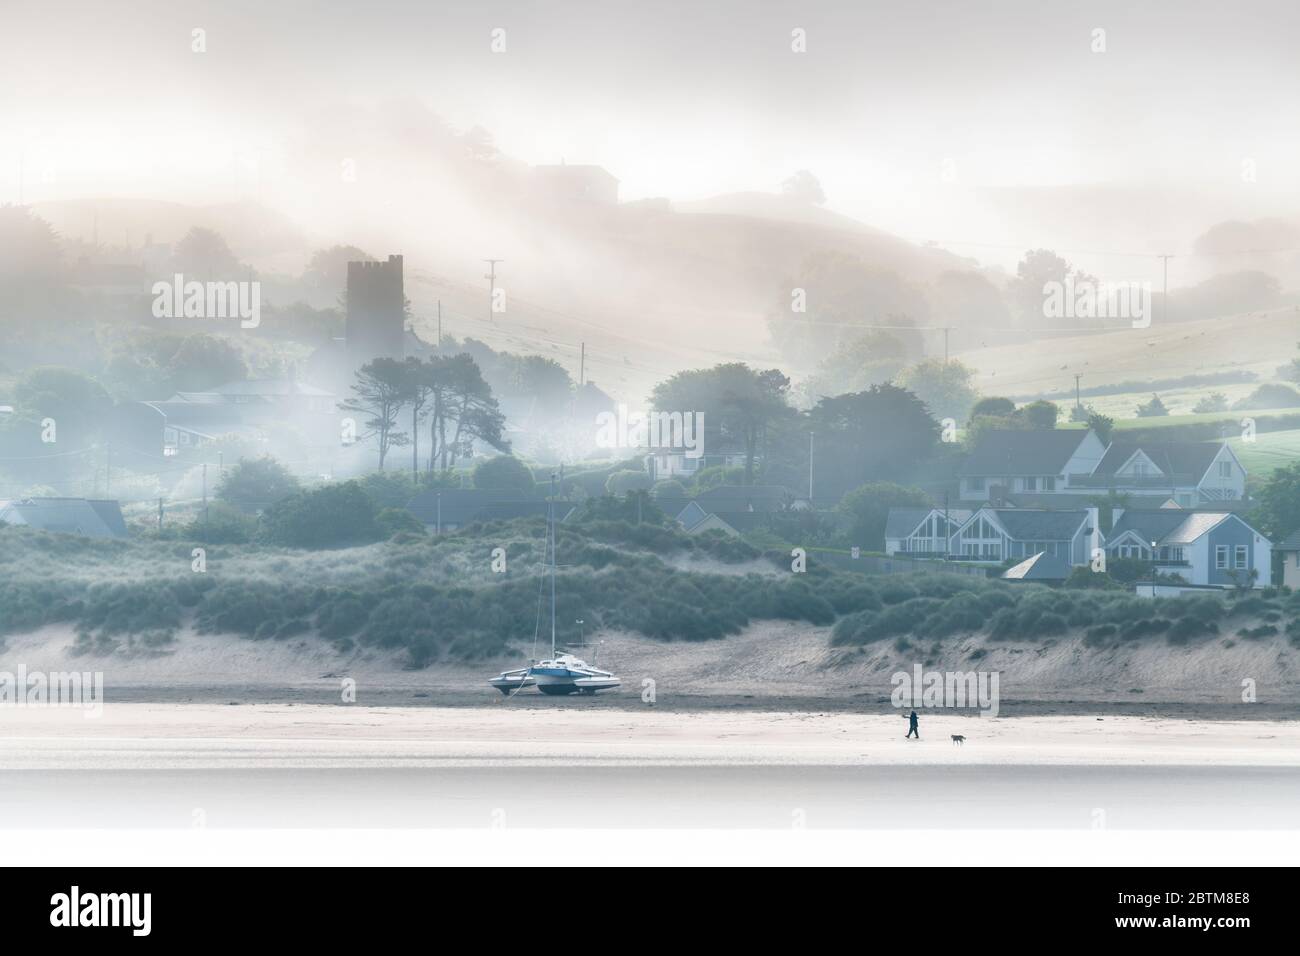 Instow, North Devon, England. Wednesday 27th May 2020. UK Weather. At dawn, low lying mist drifts across the River Torridge estuary, shrouding the little coastal village of Instow, as a solitary dog walker enjoys a deserted beach. Temperatures are predicted to reach the mid twenties in North Devon today. Credit: Terry Mathews/Alamy Live News Stock Photo